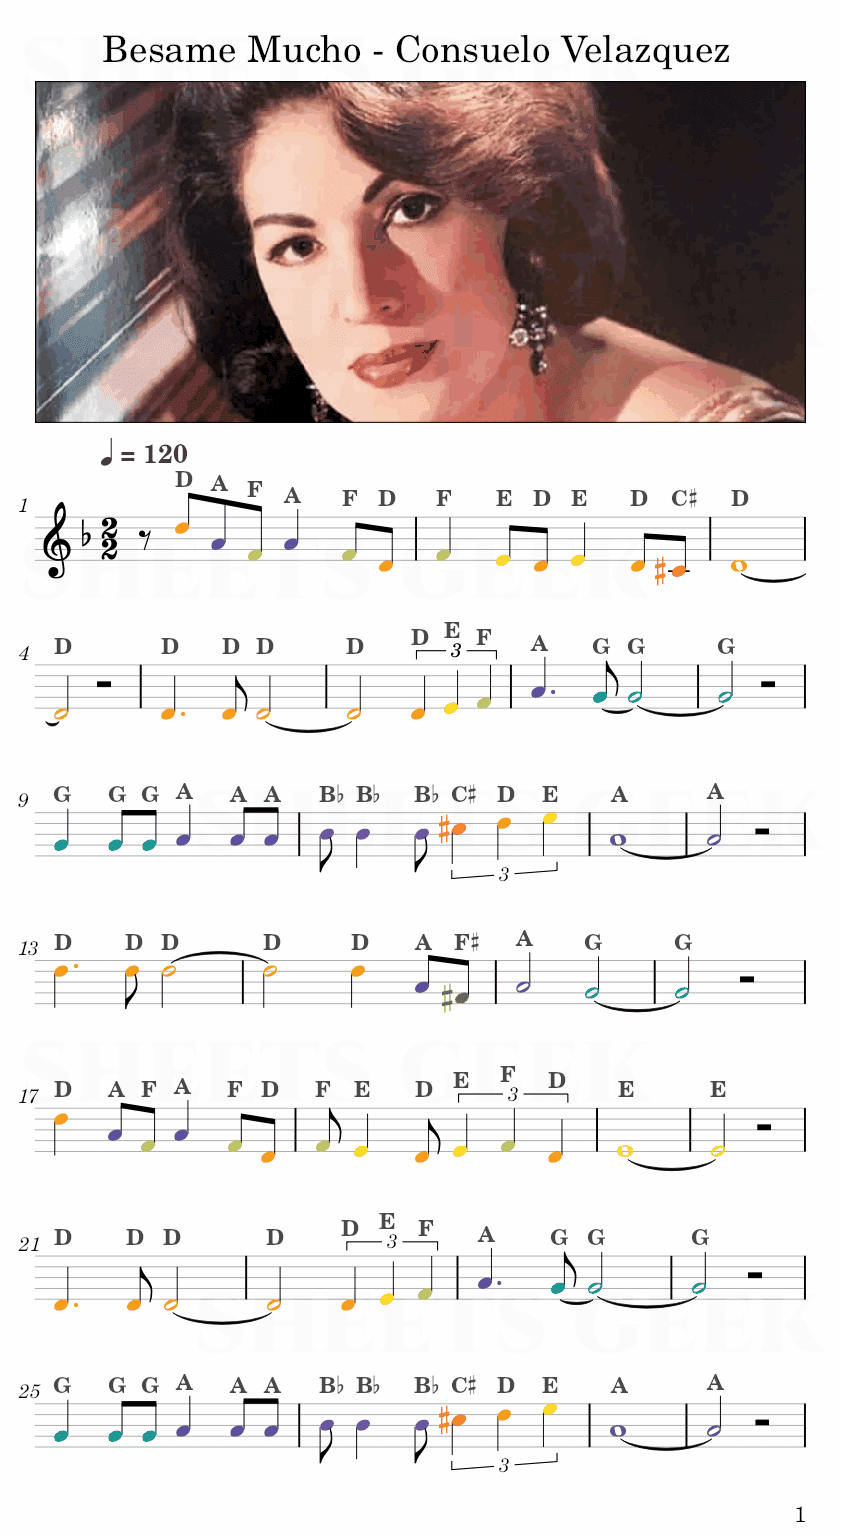 Besame Mucho - Consuelo Velazquez Easy Sheet Music Free for piano, keyboard, flute, violin, sax, cello page 1